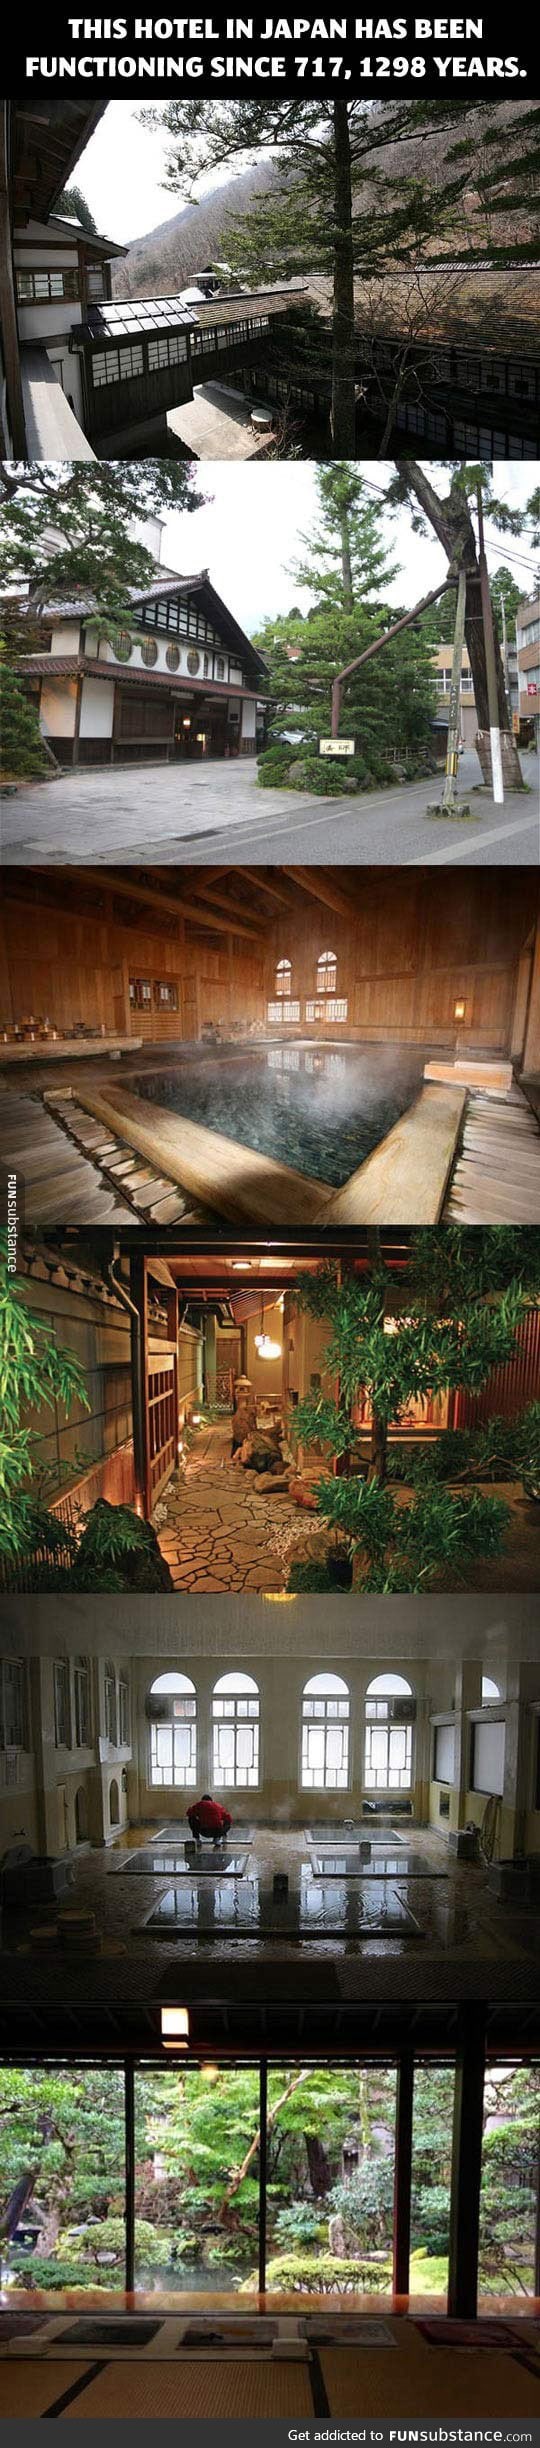 An ancient Japanese hotel that has been operating for 1298 years